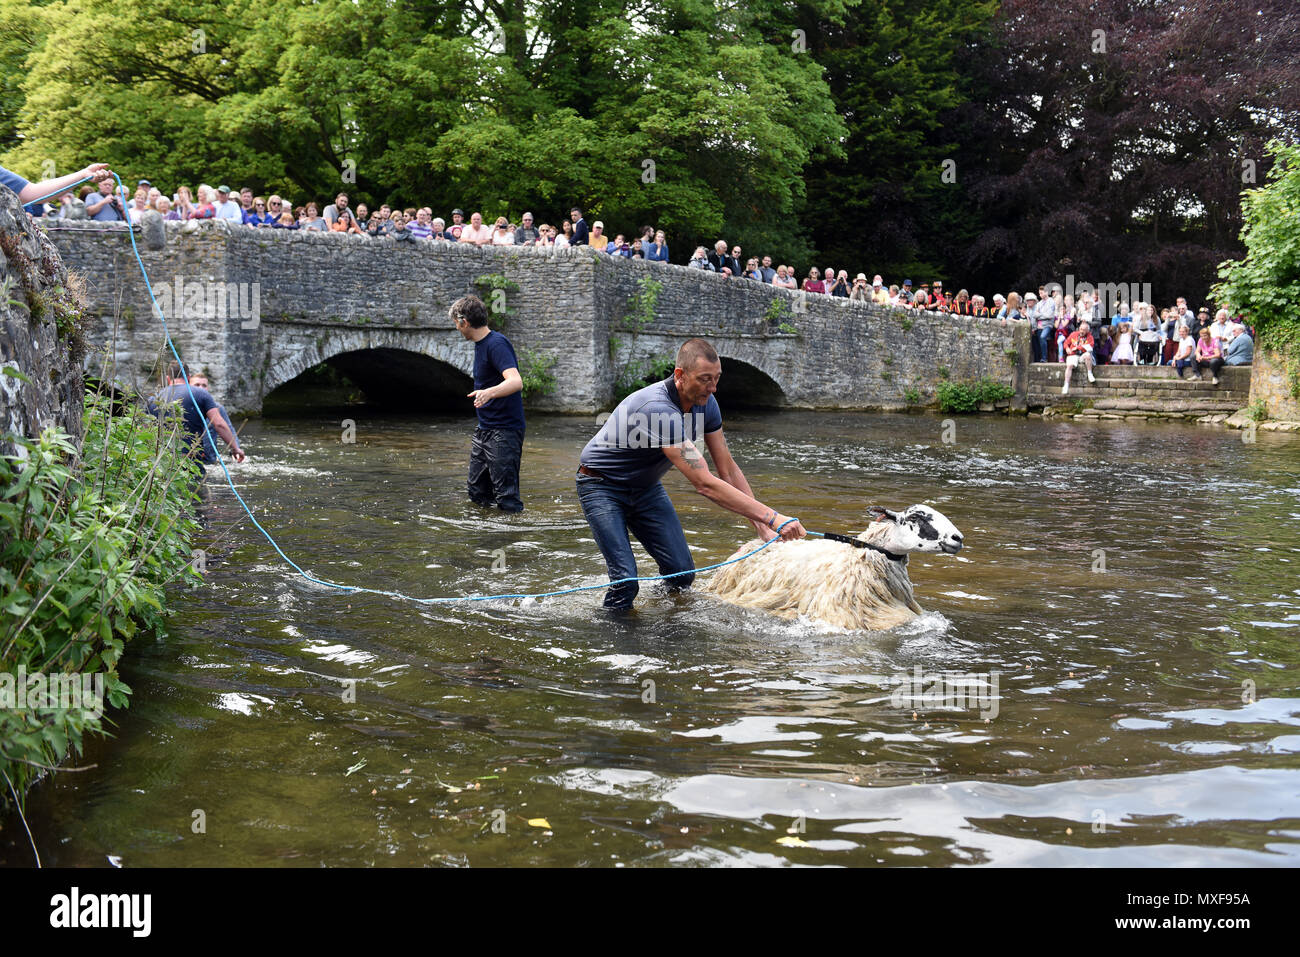 Ashford in the Water, Derbyshire, Uk Farmers dipping their sheep in the River Wye at Sheep Wash Bridge in Ashford-in-the-Water during the villages 'We Stock Photo